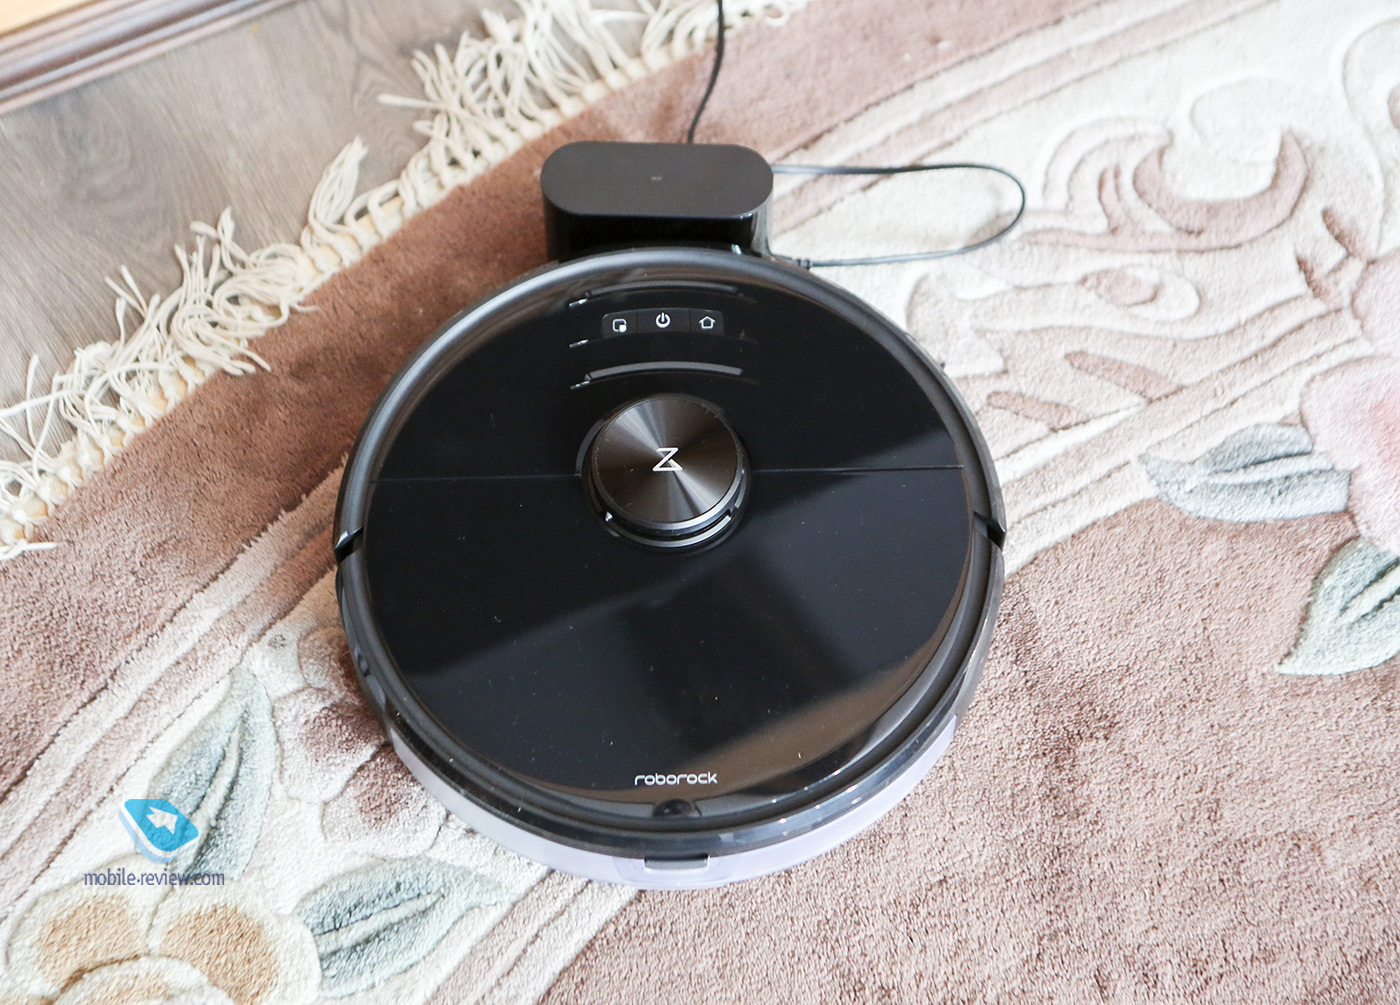 Robot vacuum cleaner with machine vision and AI algorithms - Roborock S6 MaxV